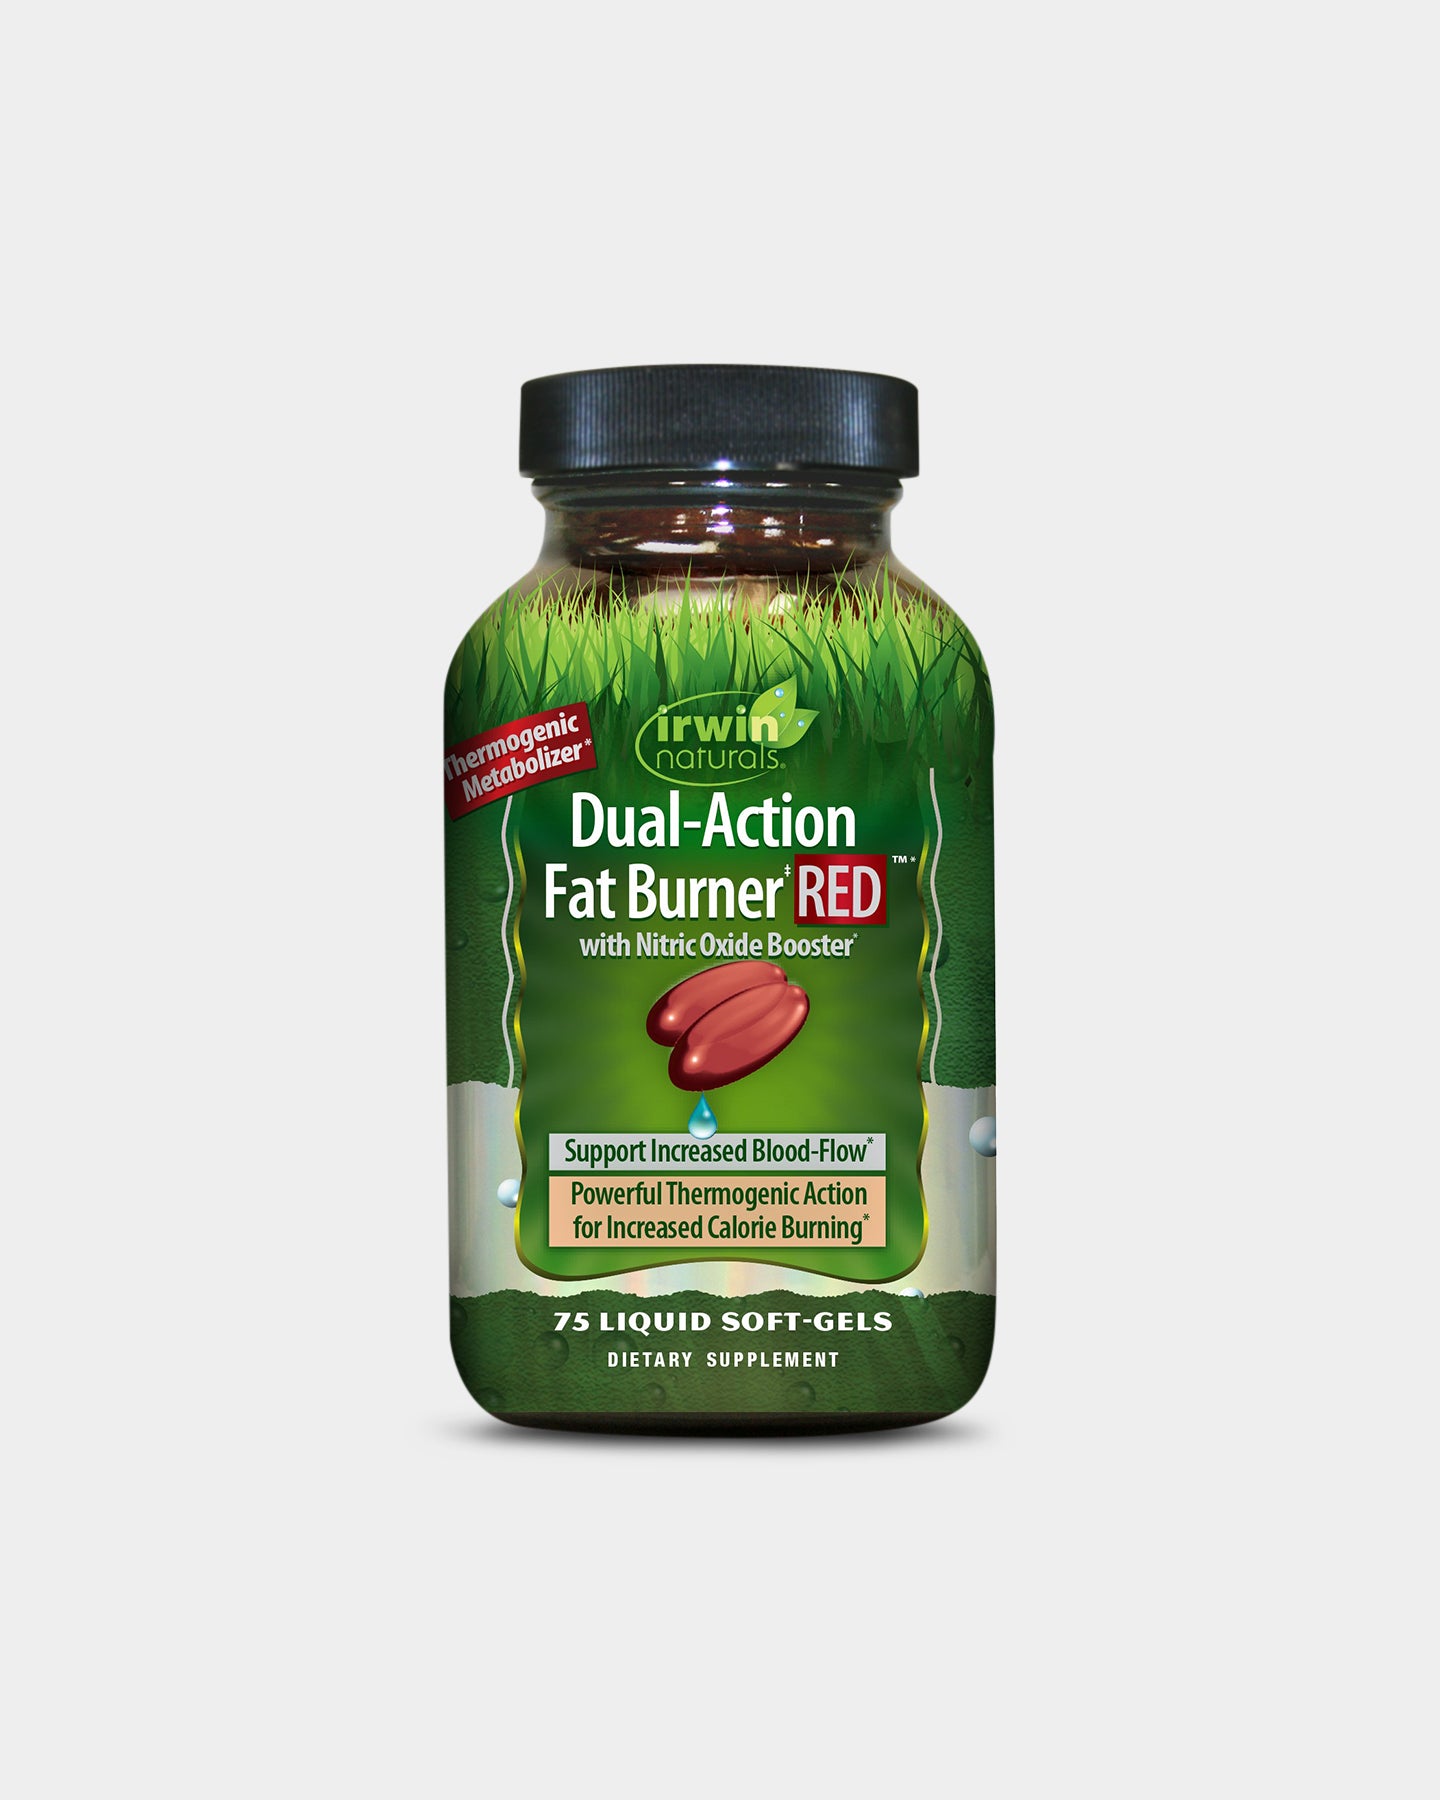 Image of Irwin Naturals Dual Action Fat Burner RED